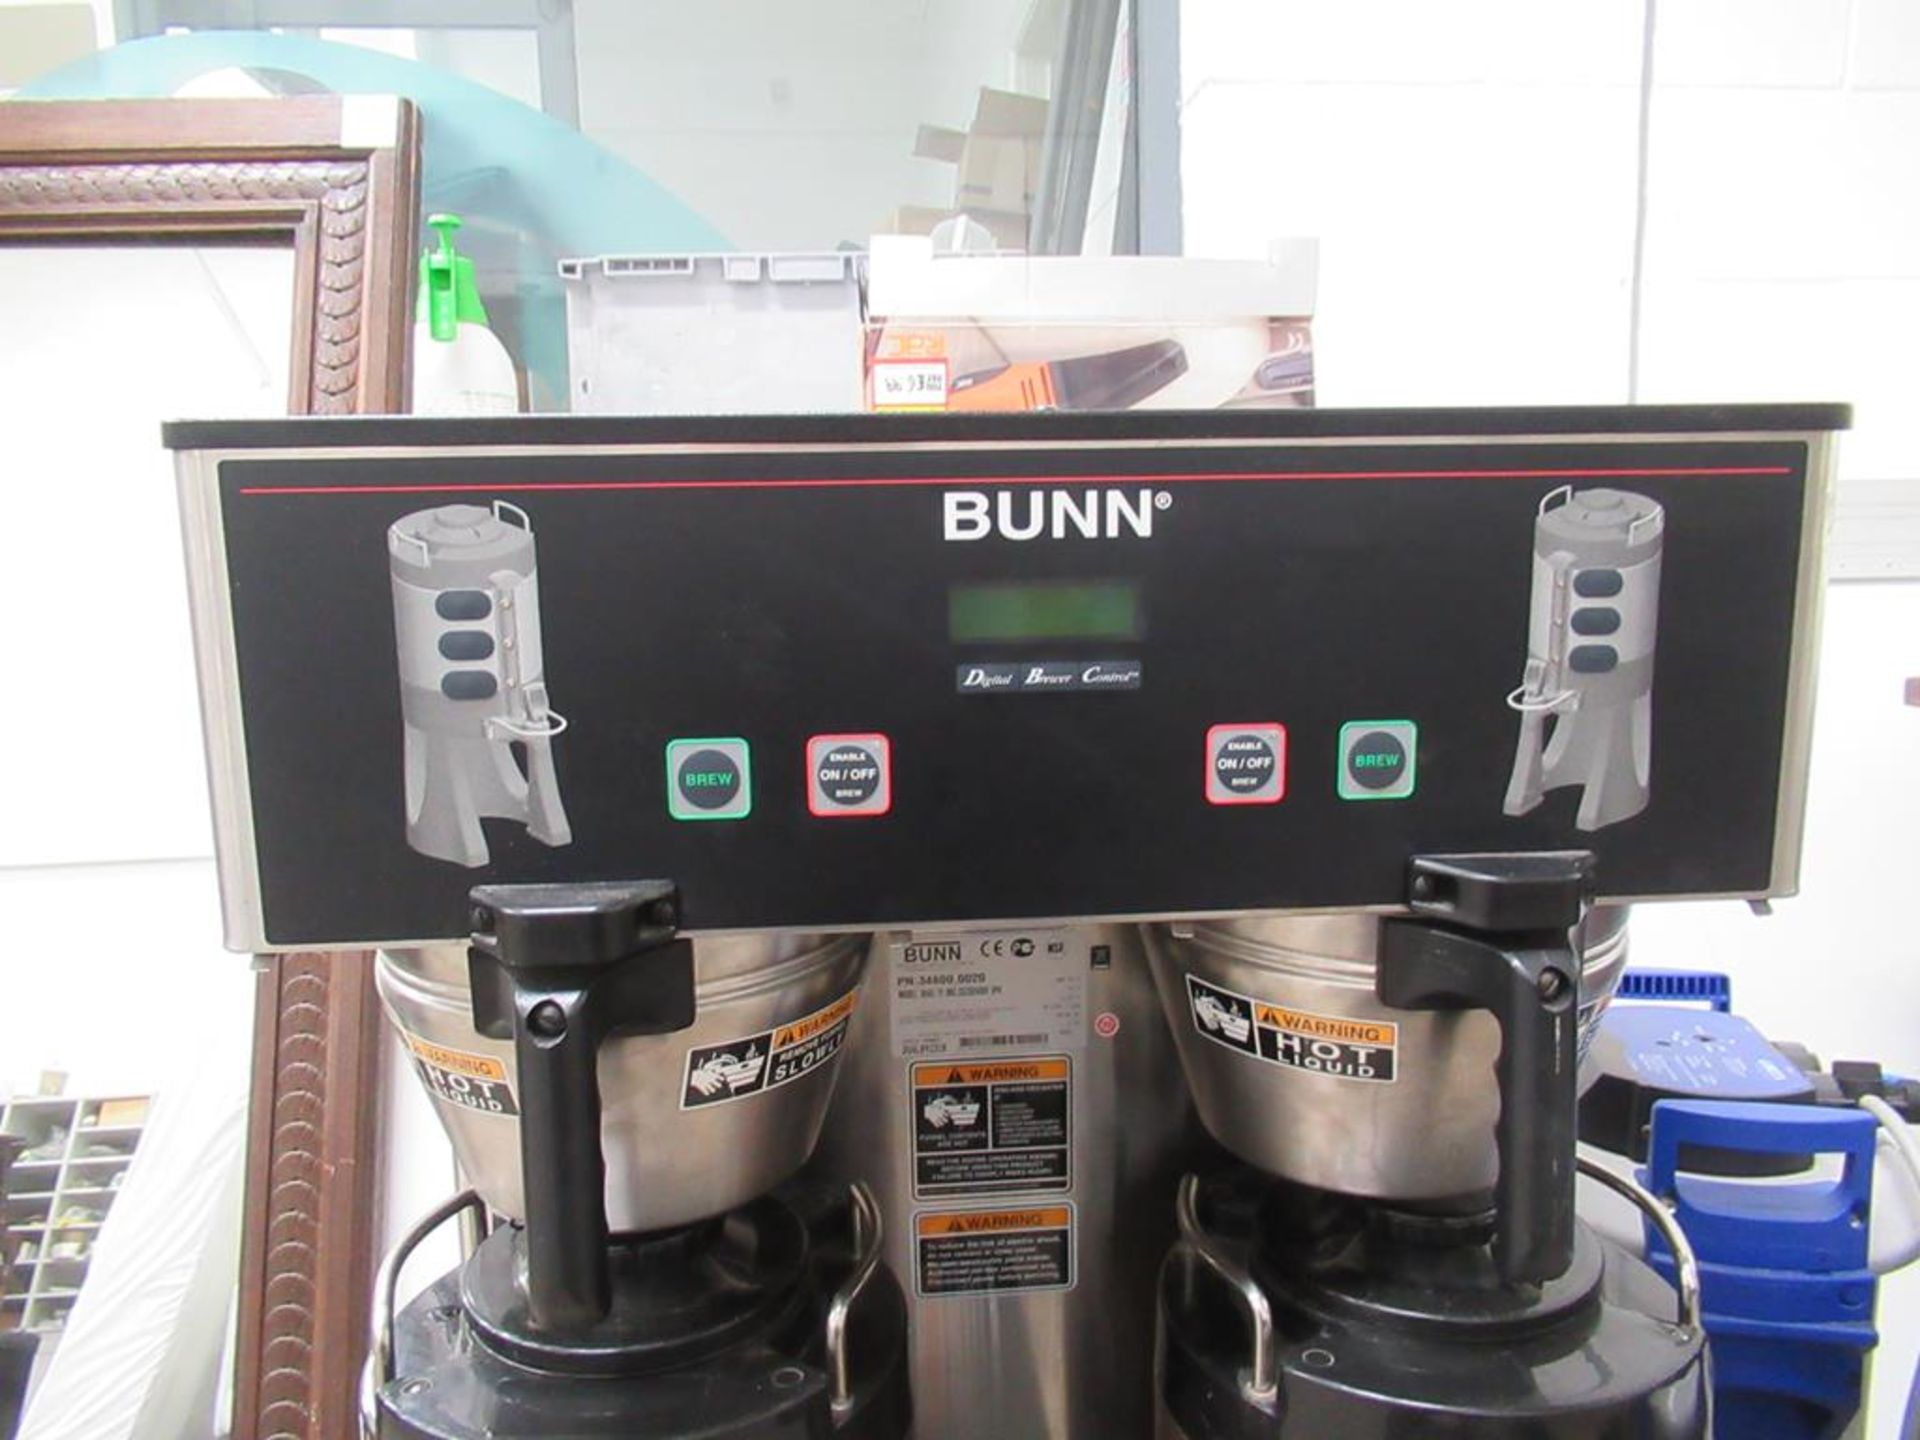 Bunn Dual TF DBC CE230/400V commercial coffee maker S/N DUAL091310 with 2 x Brita water treatment un - Image 4 of 11